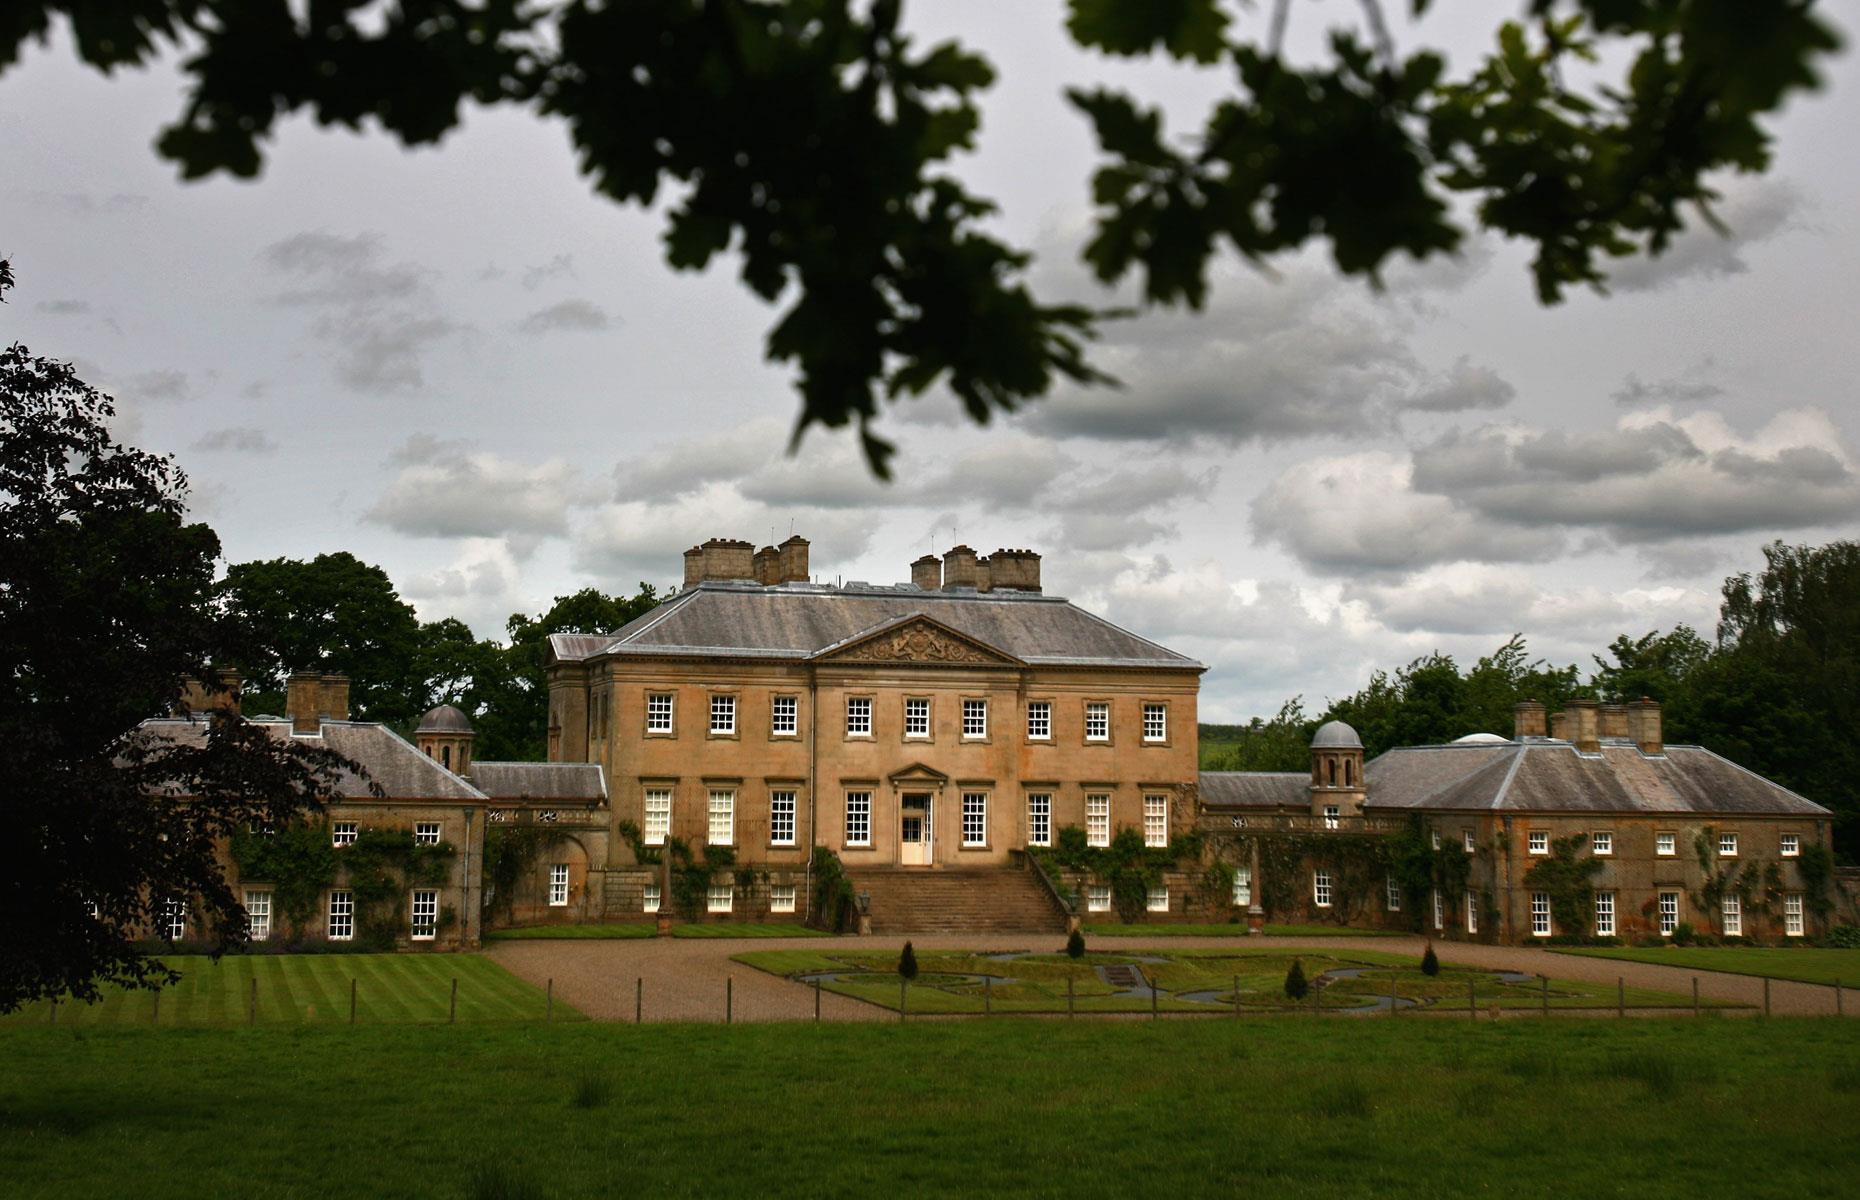 <p>Still in Scotland, you may be drawn to this magnificent Palladian country house near Glasgow that King Charles saved for the nation in 2007. <a href="https://dumfries-house.org.uk/about">Dumfries House</a> was built in the 1750s for the 5th Earl of Dumfries by eminent architects John Adam and Robert Adam.  </p>  <p>The home was struggling to survive when it was purchased by a consortium led by the monarch, who put in £20 million ($25.3m) from his own charitable foundation’s funds. The house was in a poor state of repair when the King bought it...</p>